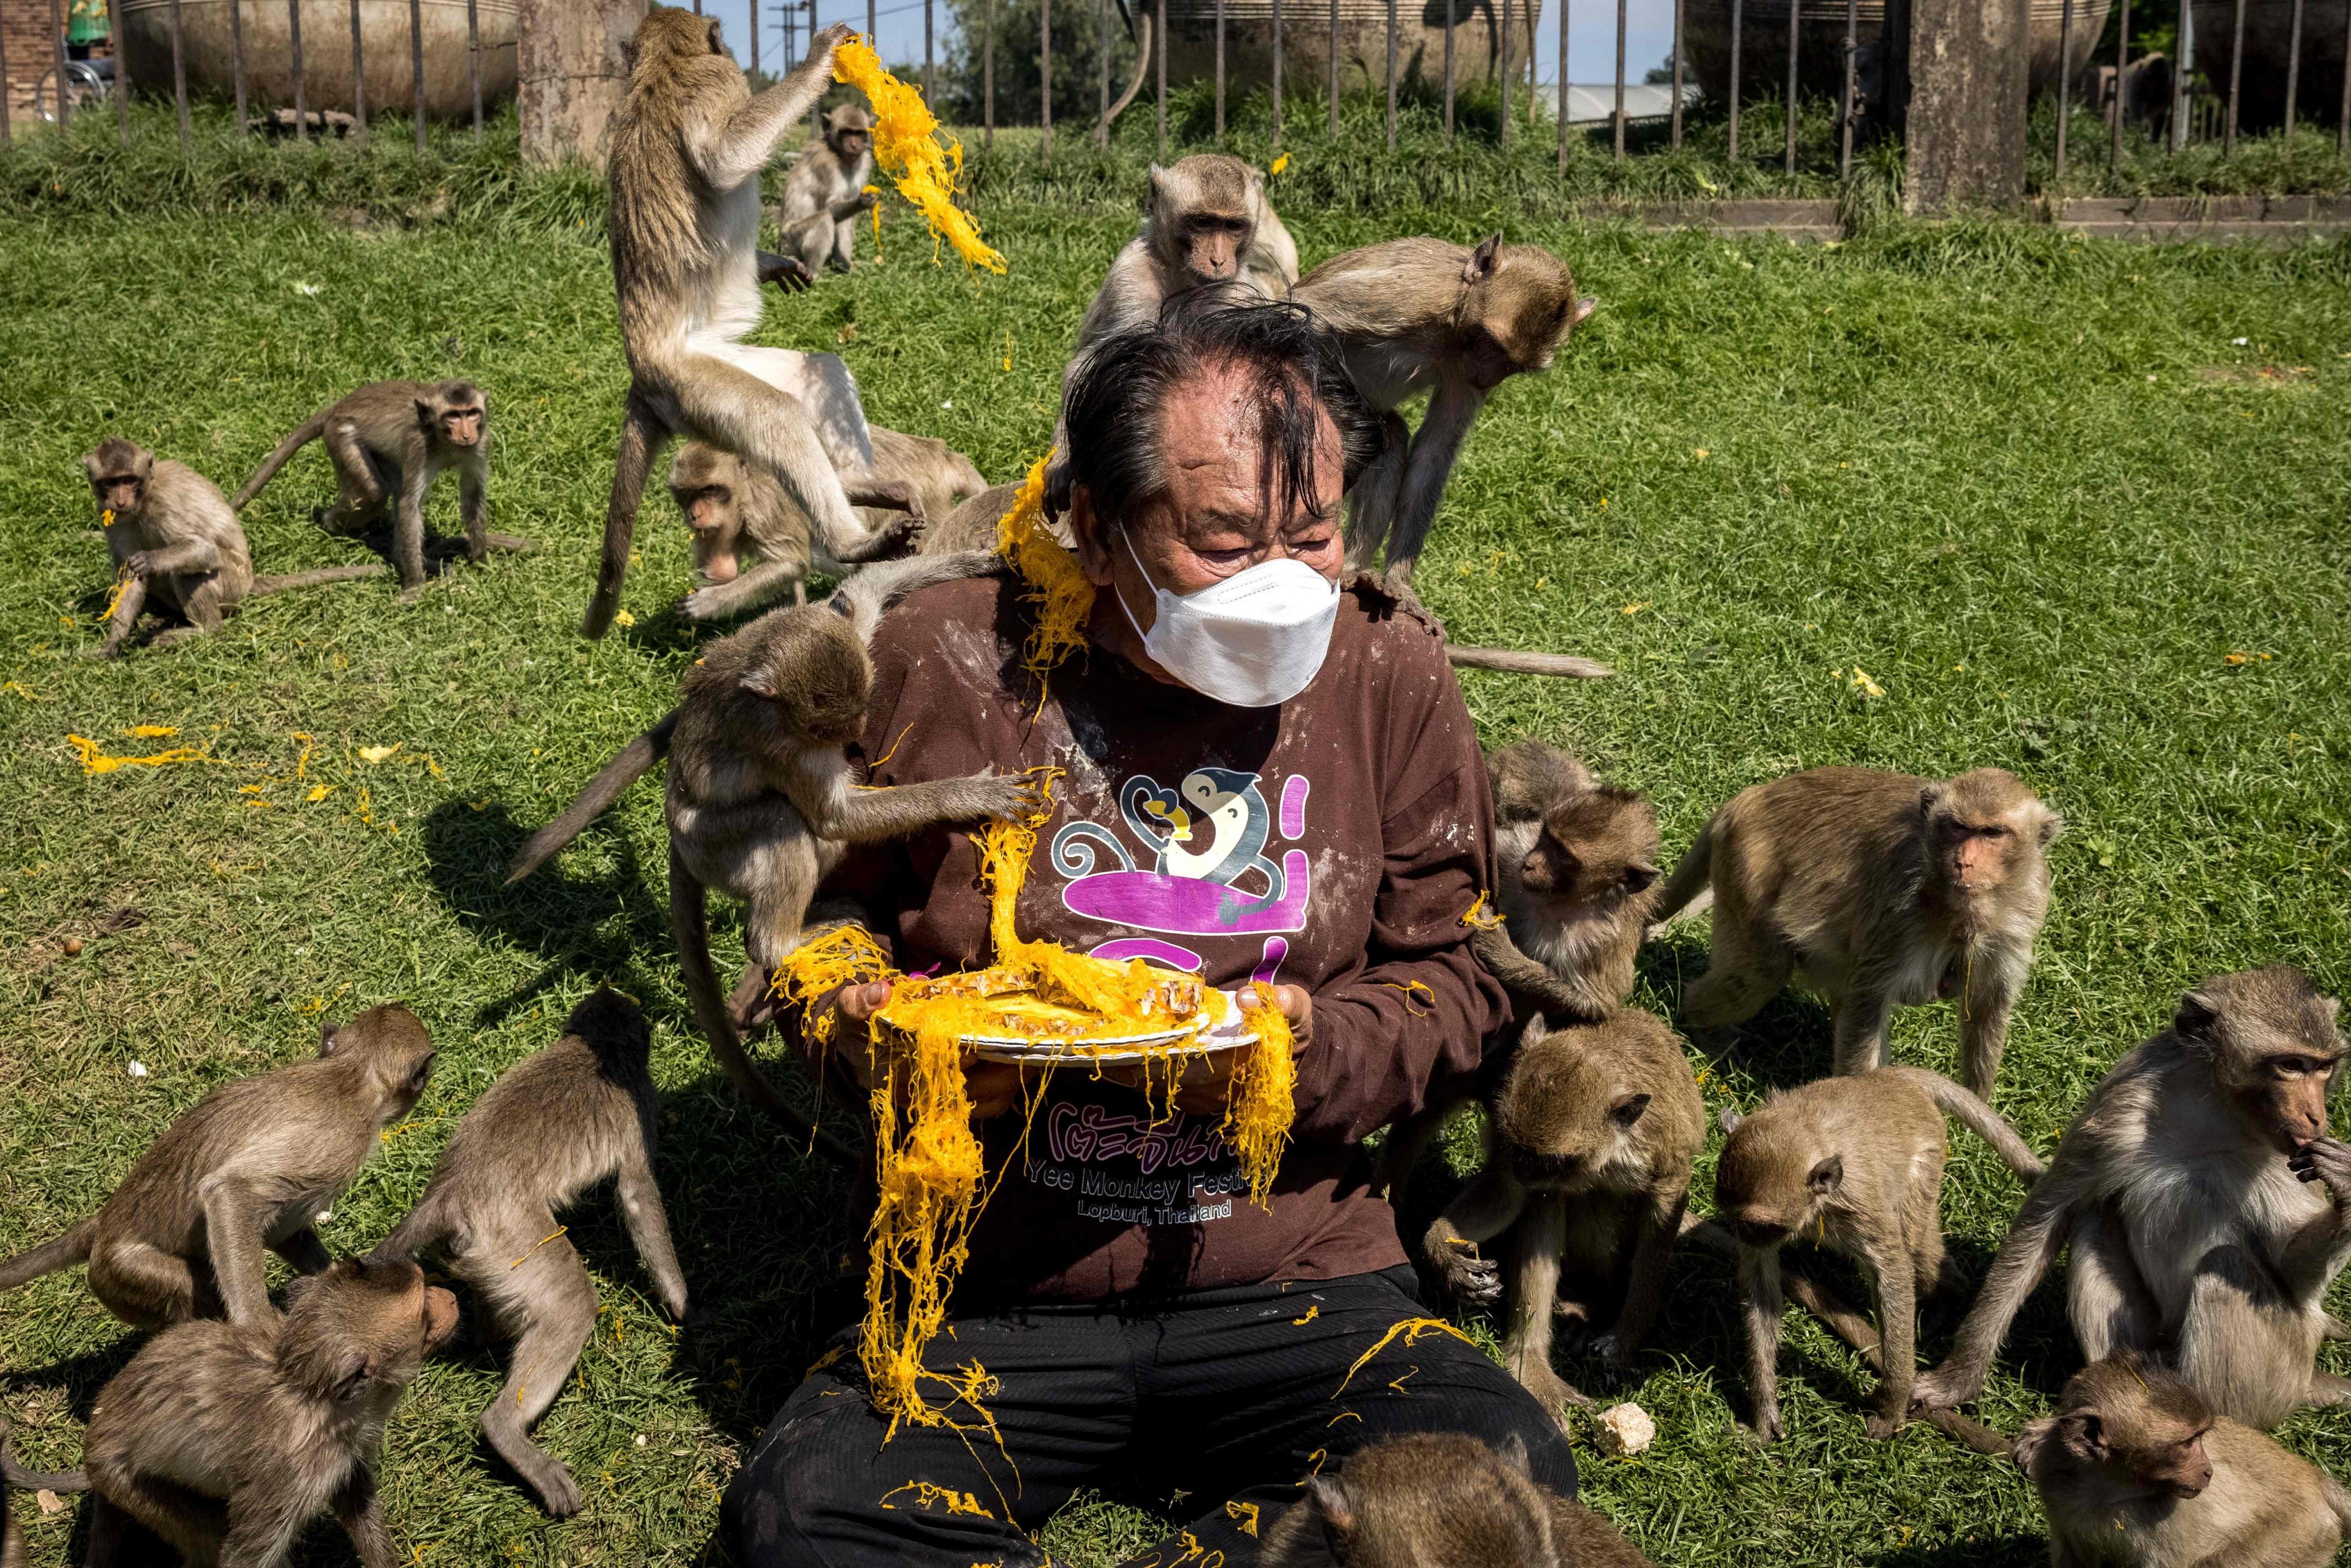 Macaque monkeys climb over a man as he serves them desert outside the Phra Prang Sam Yod temple during the annual Monkey Buffet Festival in Lopburi province. Photo: AFP